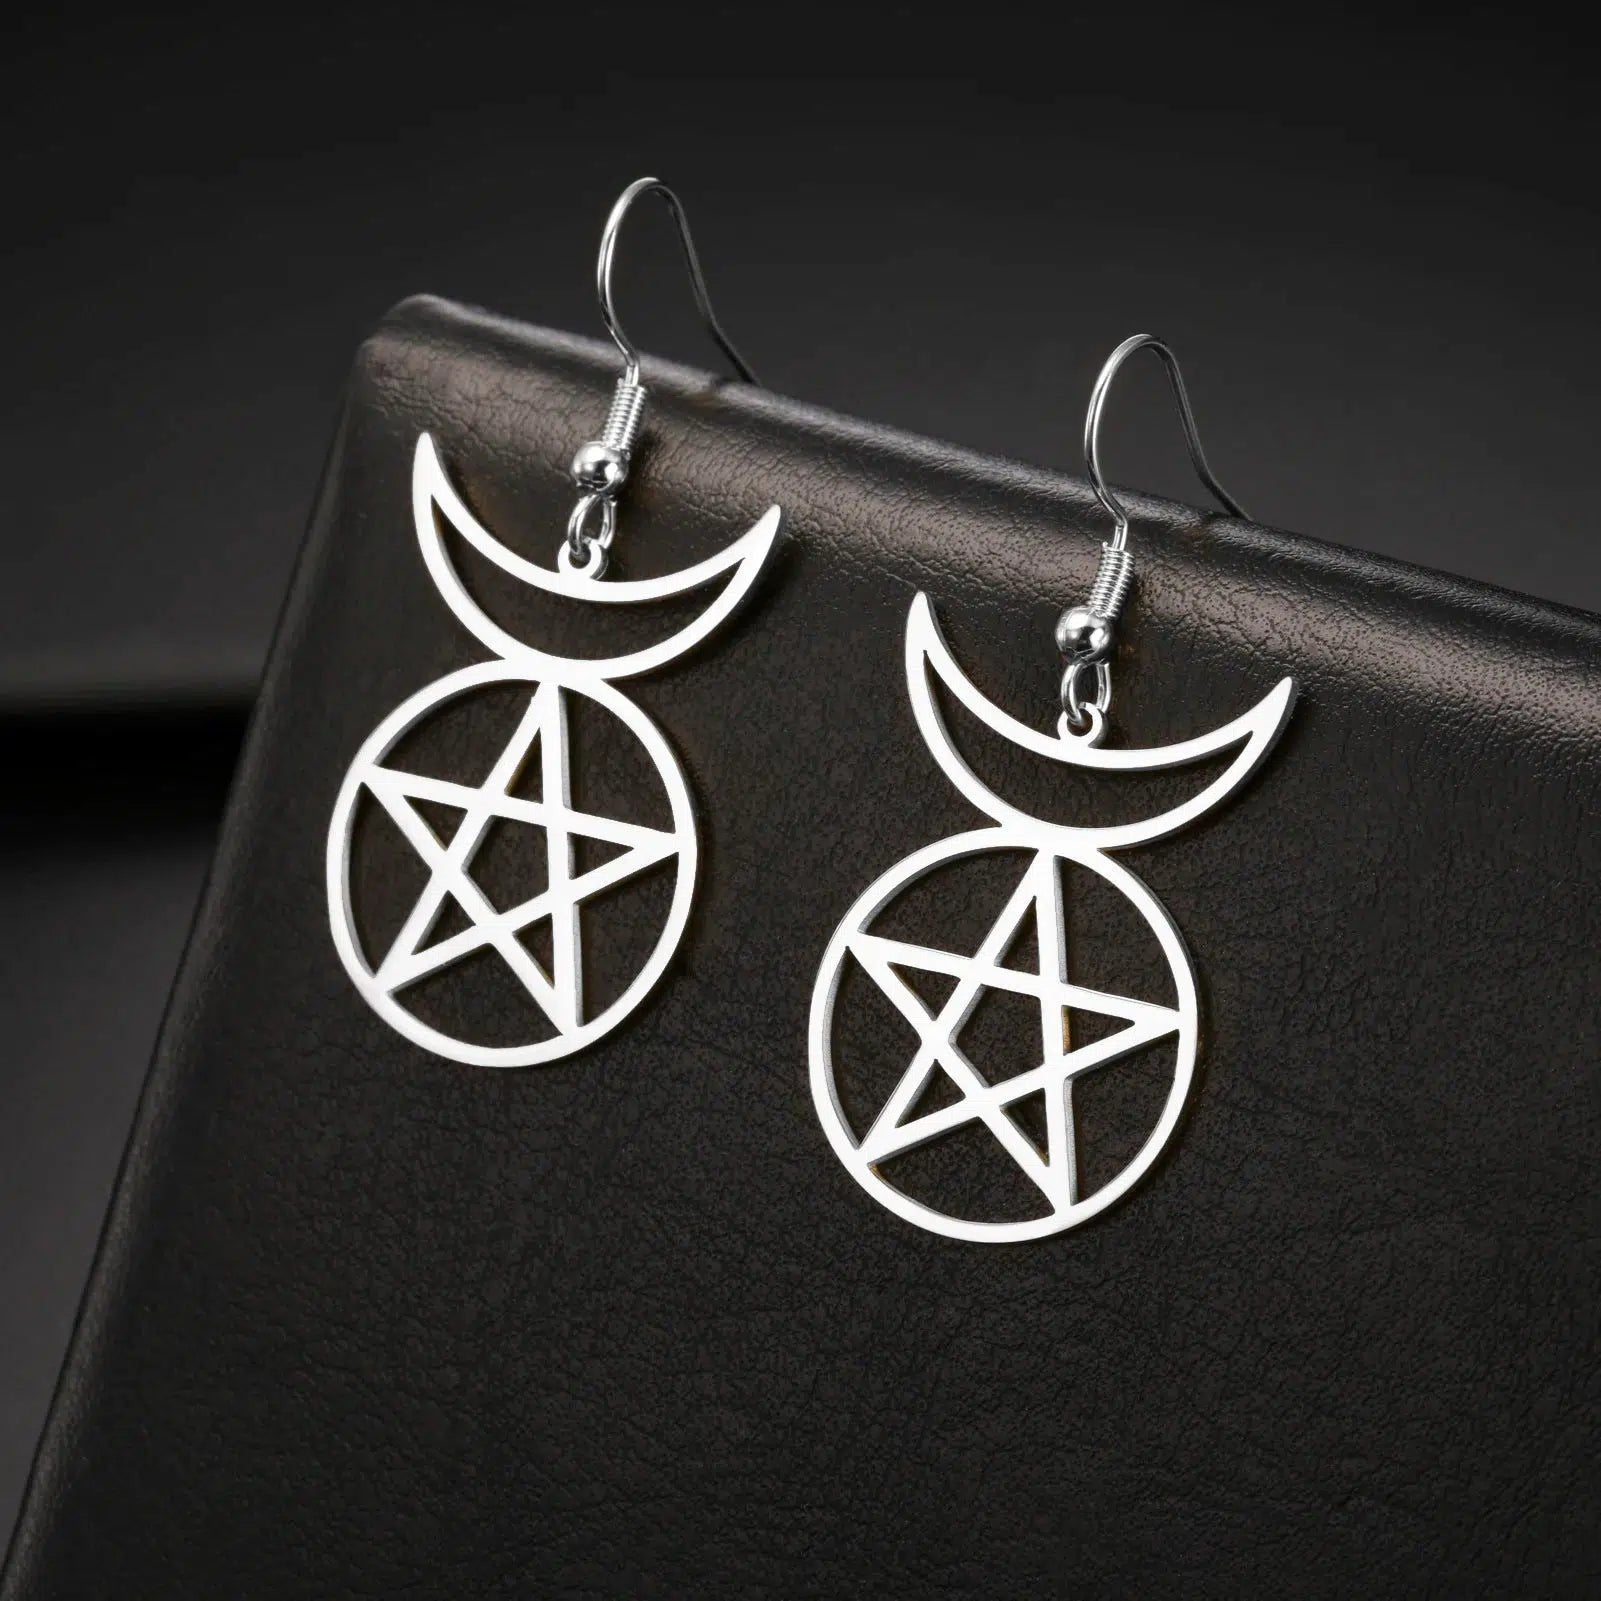 Pentacle Moon Witchcraft Earrings Wicca Amulet Jewelry-MoonChildWorld